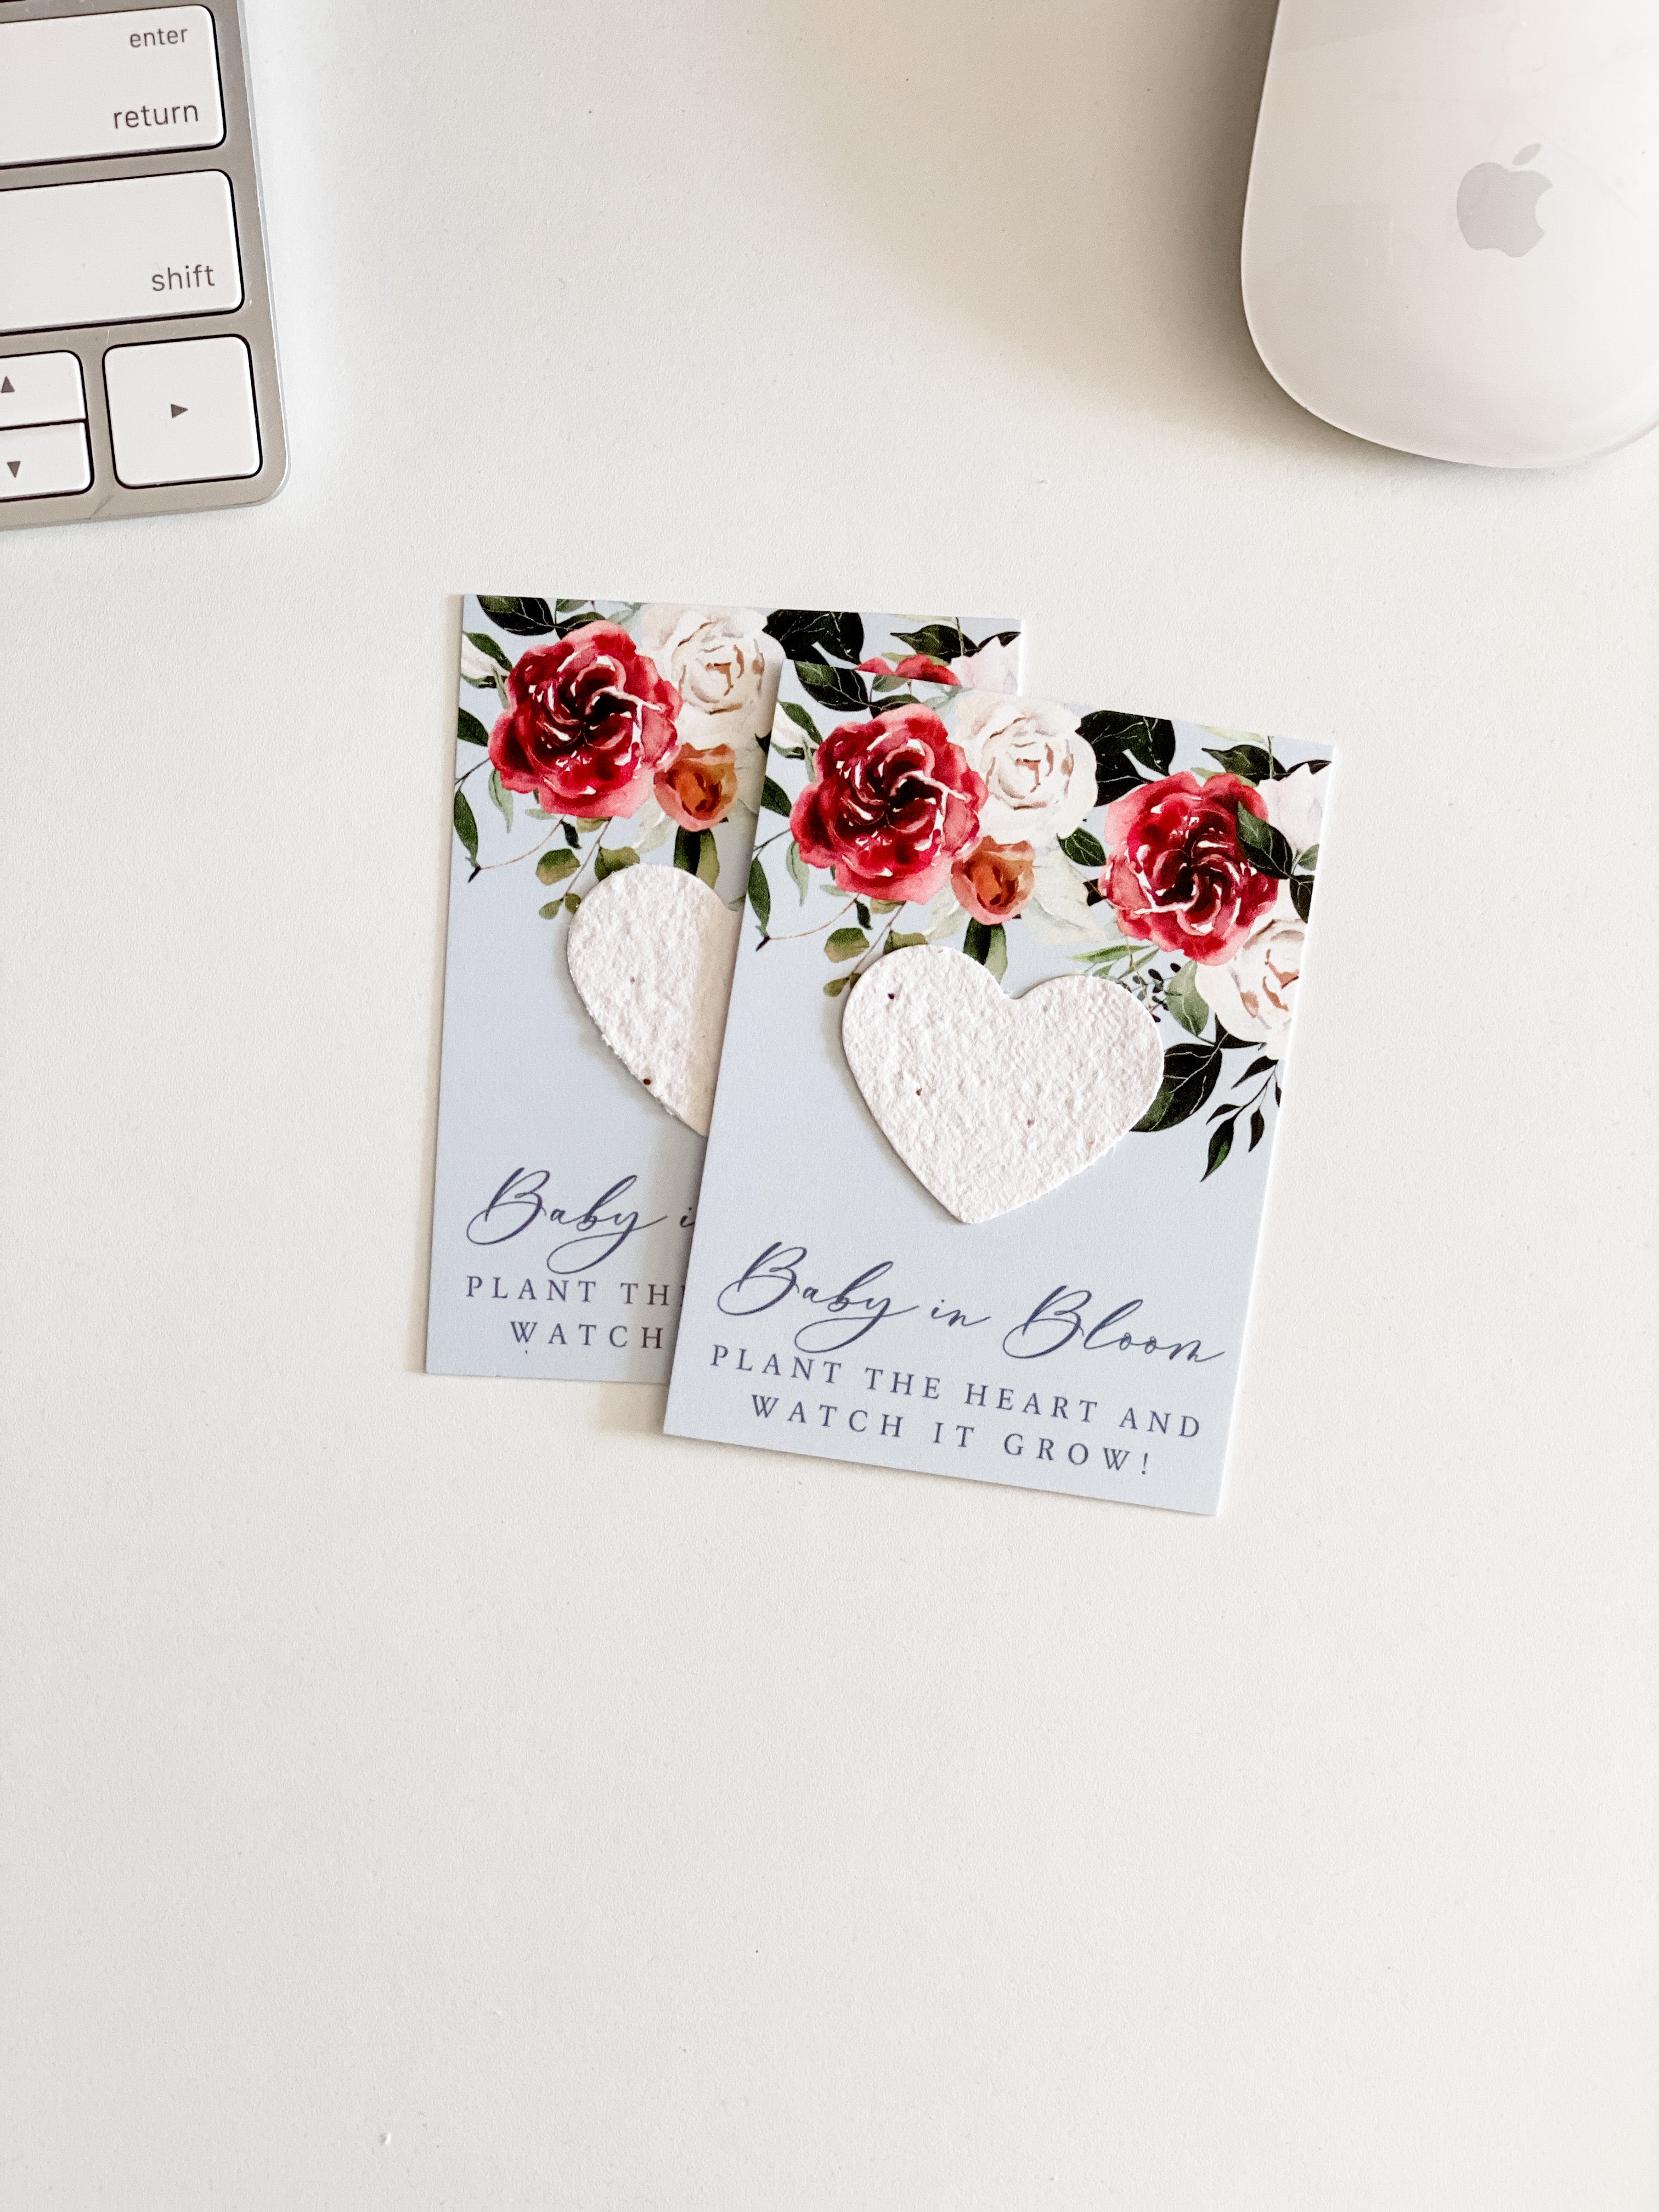 growNOTES™ Wallet Favors - Baby in Bloom Neutral Styles